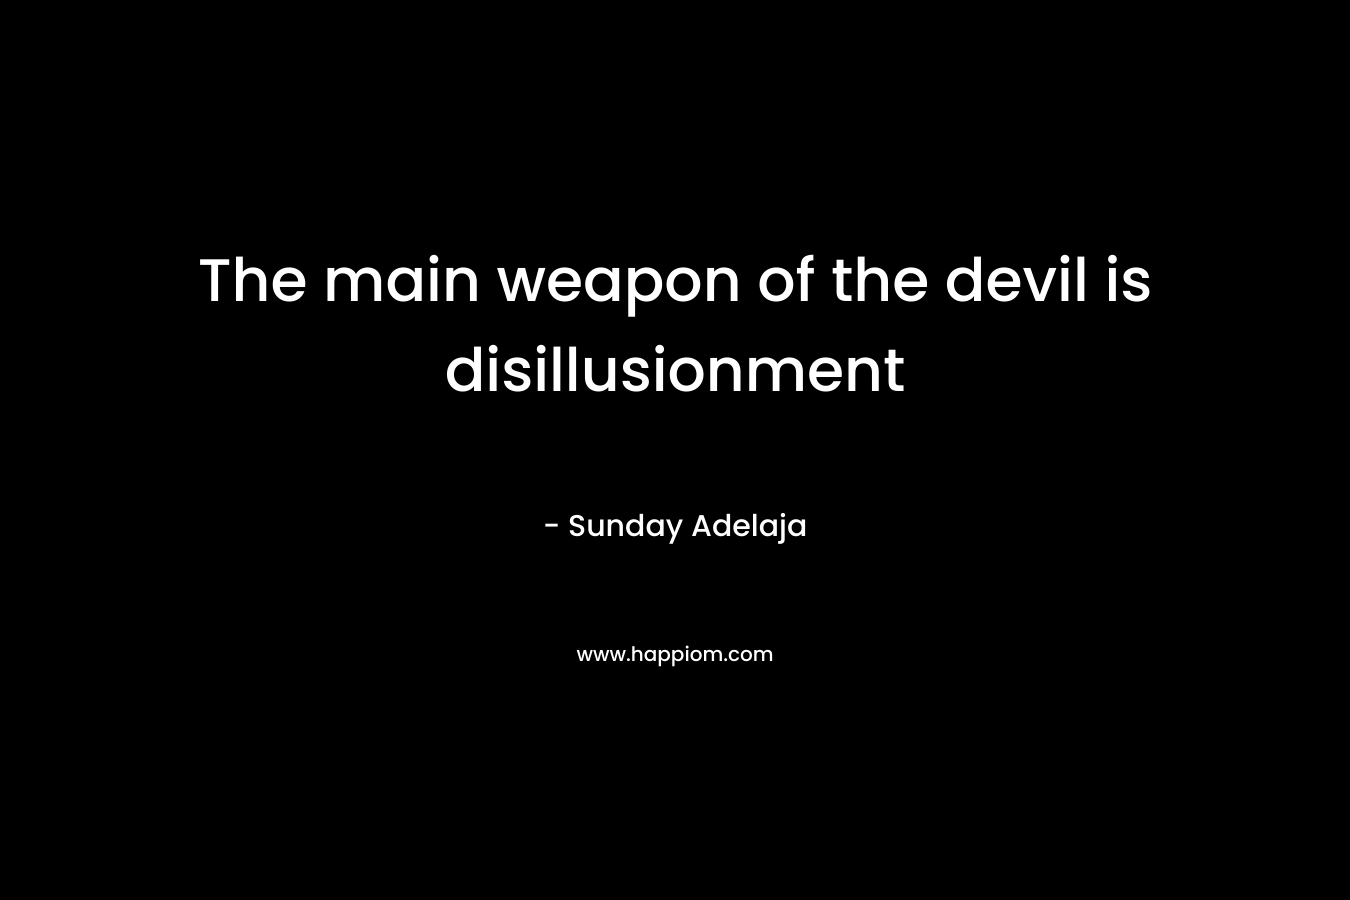 The main weapon of the devil is disillusionment